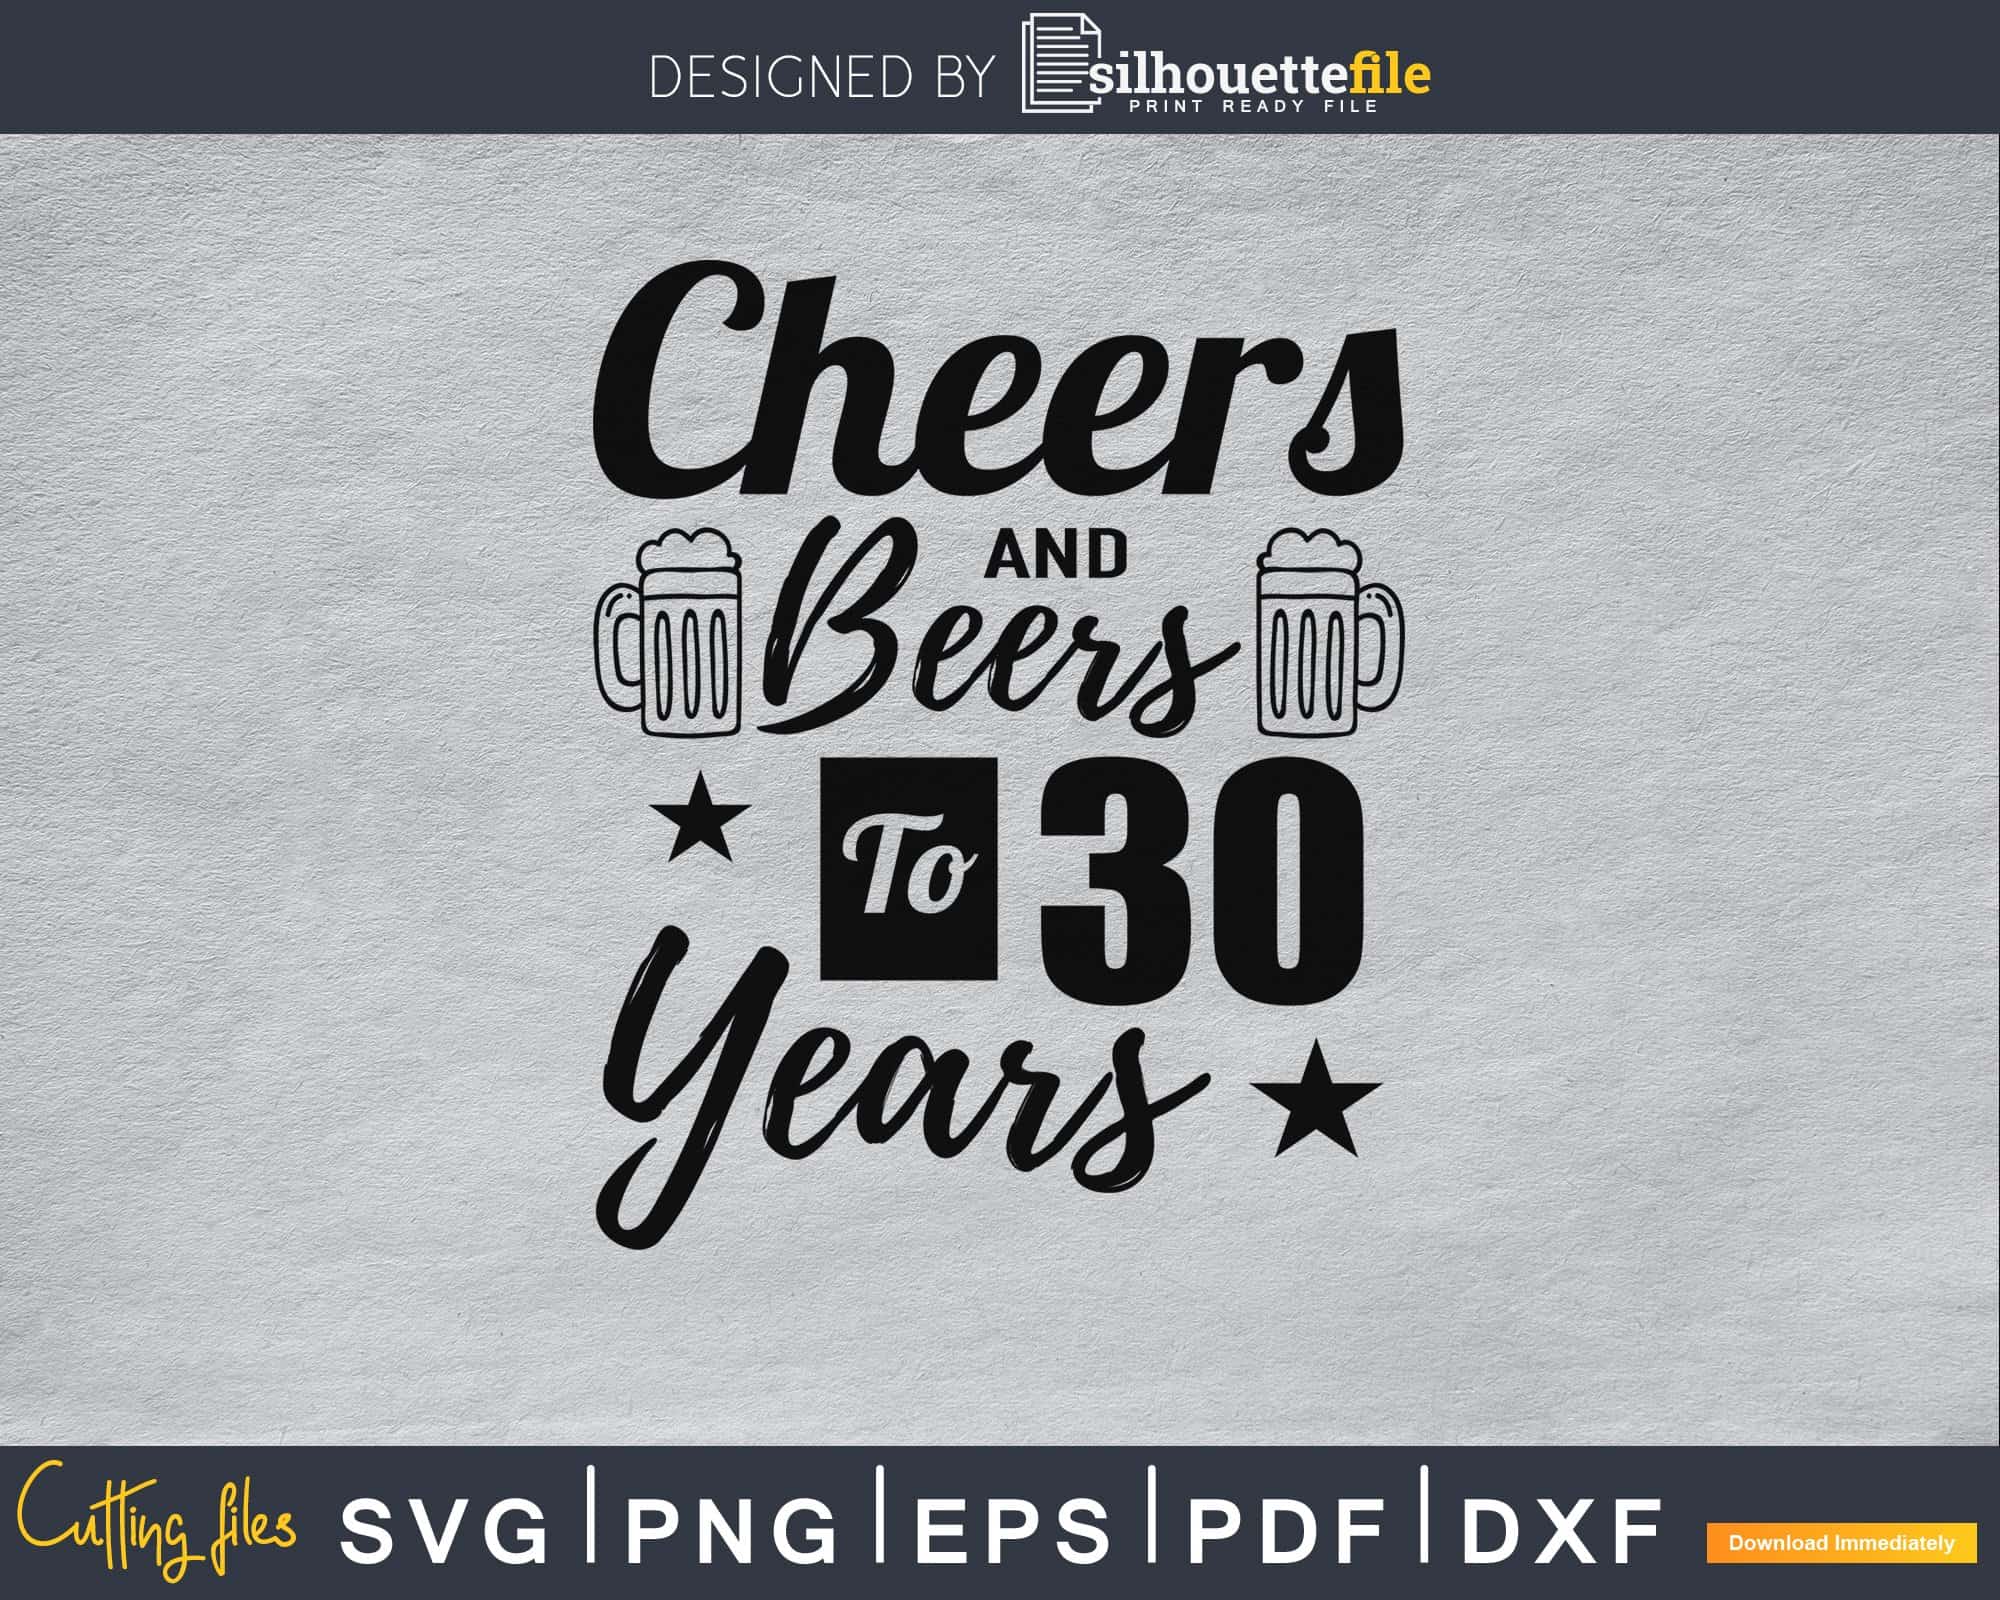 Cheers And Beers To 30 Years Svg Cutting Files | Silhouettefile